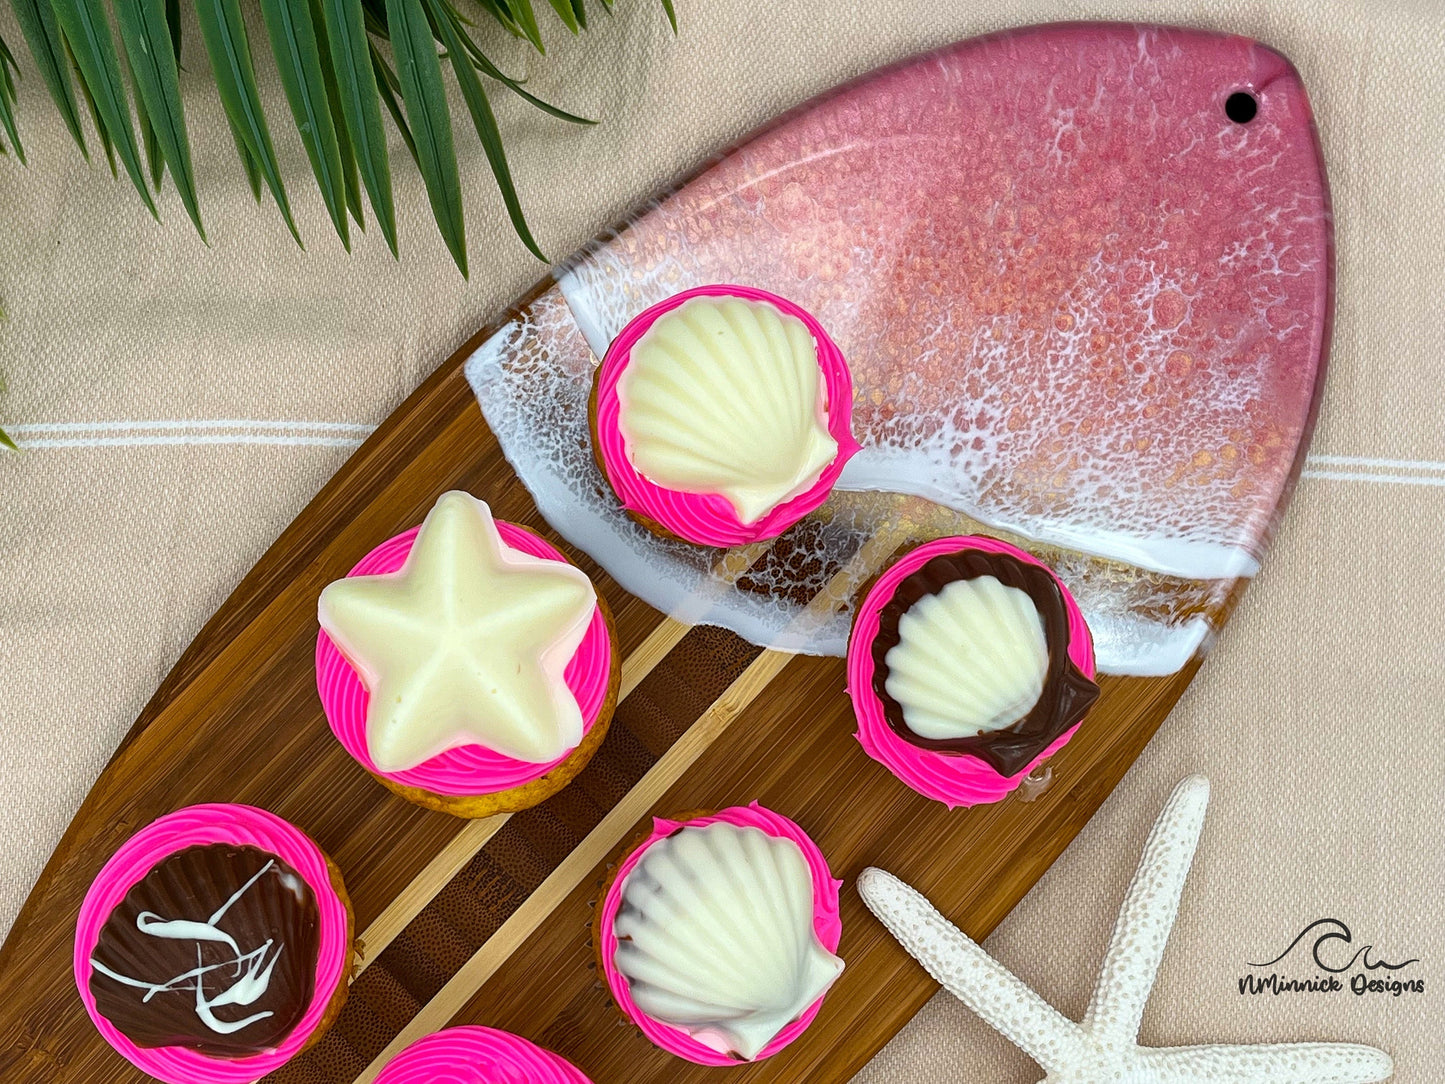 Surfboard-shaped bamboo cutting board with the top third of the board covered in a coral pink and gold tinted ocean resin art resembling the waves of the ocean. Laying on a tan beach towel next to a natural starfish (not included). Decorated with cupcakes with pink frosting and adorned with chocolate seashells